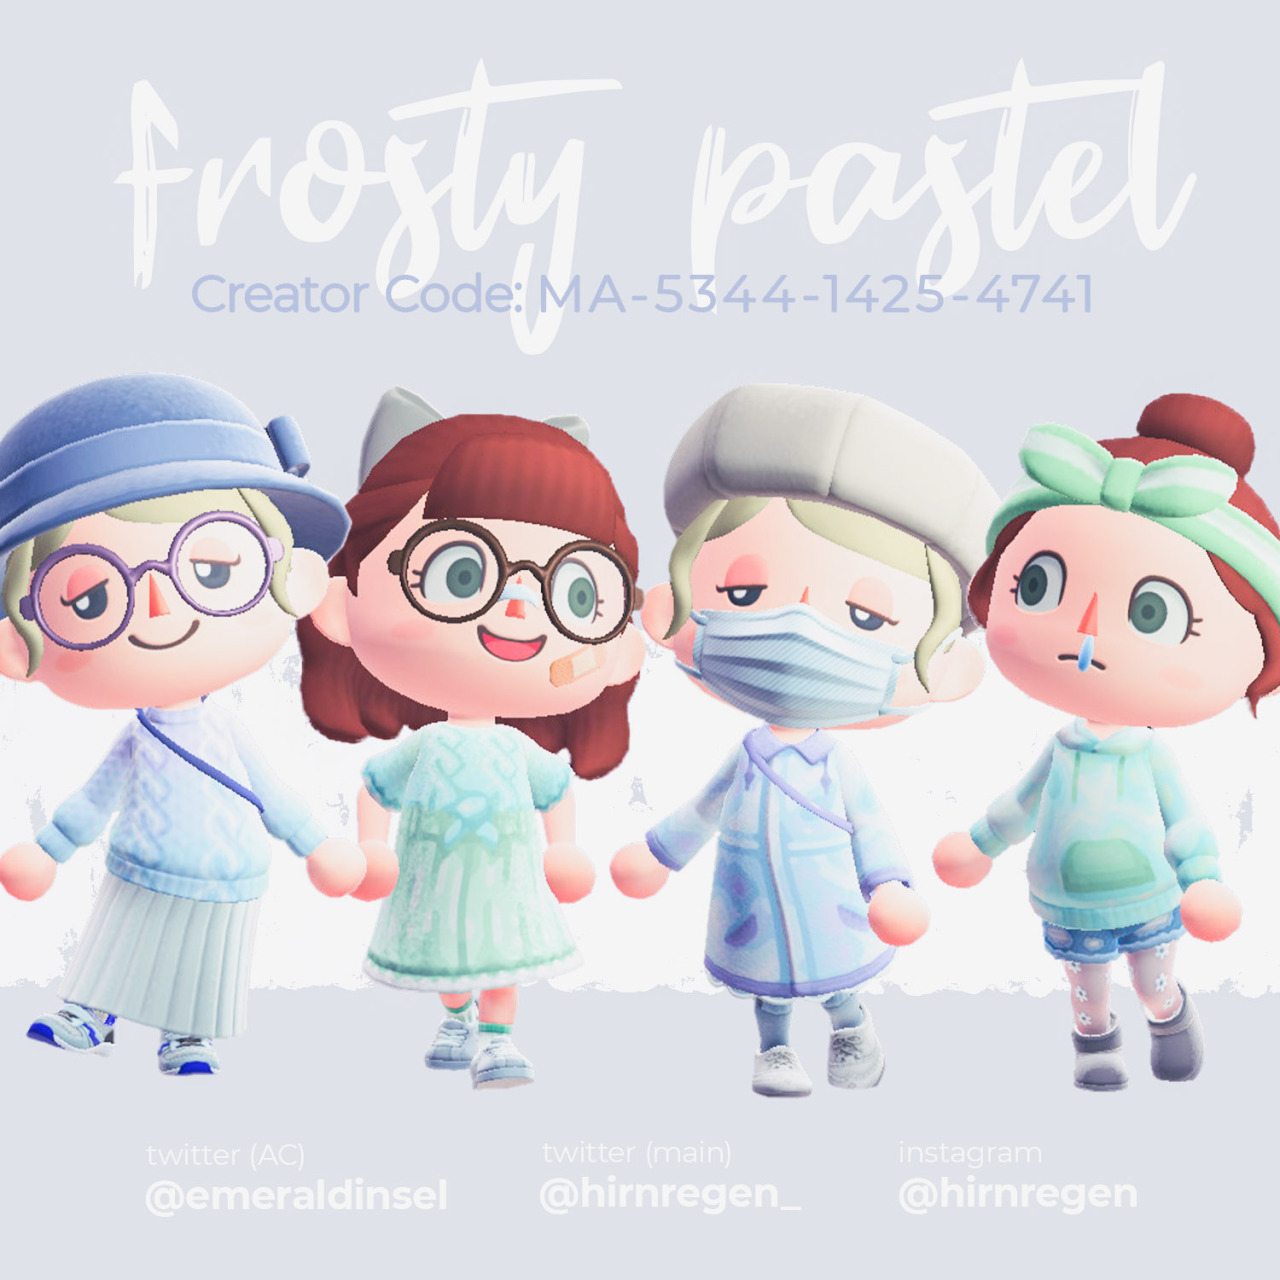 frosty pastel collection ✿ by emeraldinsel on twt #acnh#acnh design #acnh custom design #acnh pattern#animal crossing#type: coat#coat#top#clothes #type: short sleeve dress  #short sleeve dress #dress#type: sweater#sweater#type: hoodie#hoodie#blue#pastel#winter